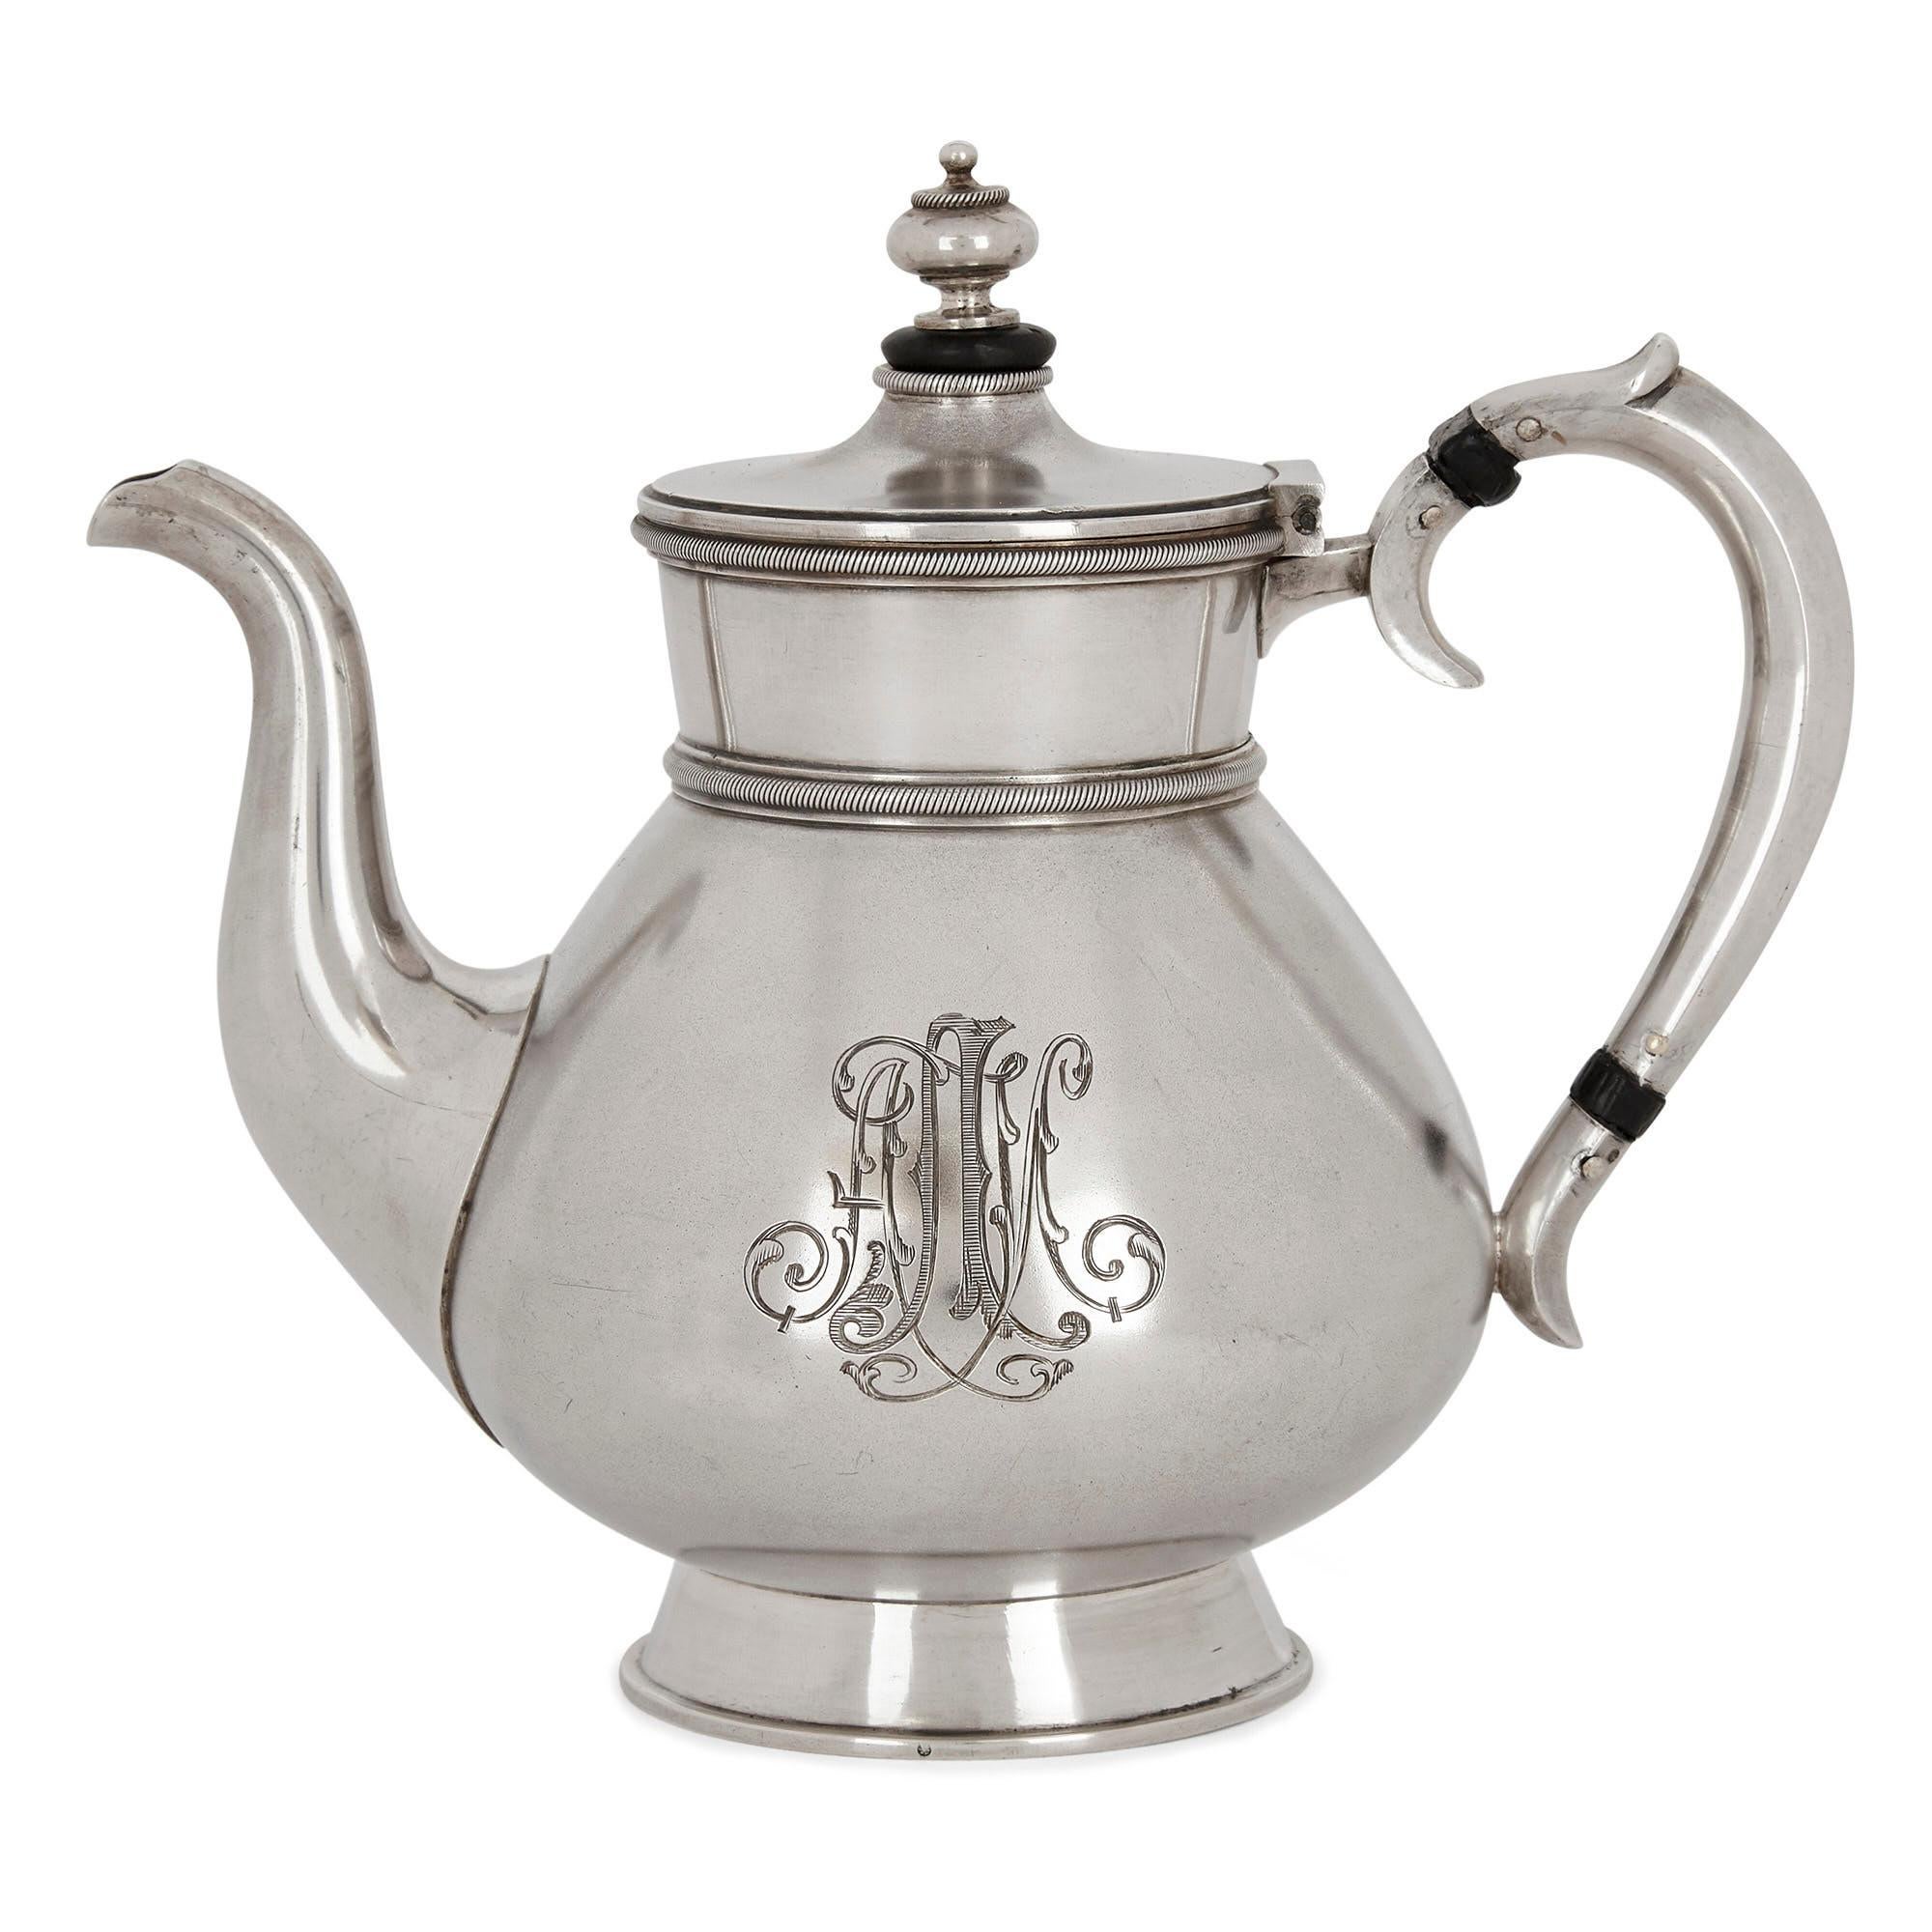 Three-piece Russian silver tea set
Russian, circa 1890
Measures: Teapot: Height 17cm, width 20cm, depth 12cm
Creamer: Height 11cm, width 14cm, depth 9cm

This superb set is crafted from fine silver in the elegant Russian Neoclassical style. The